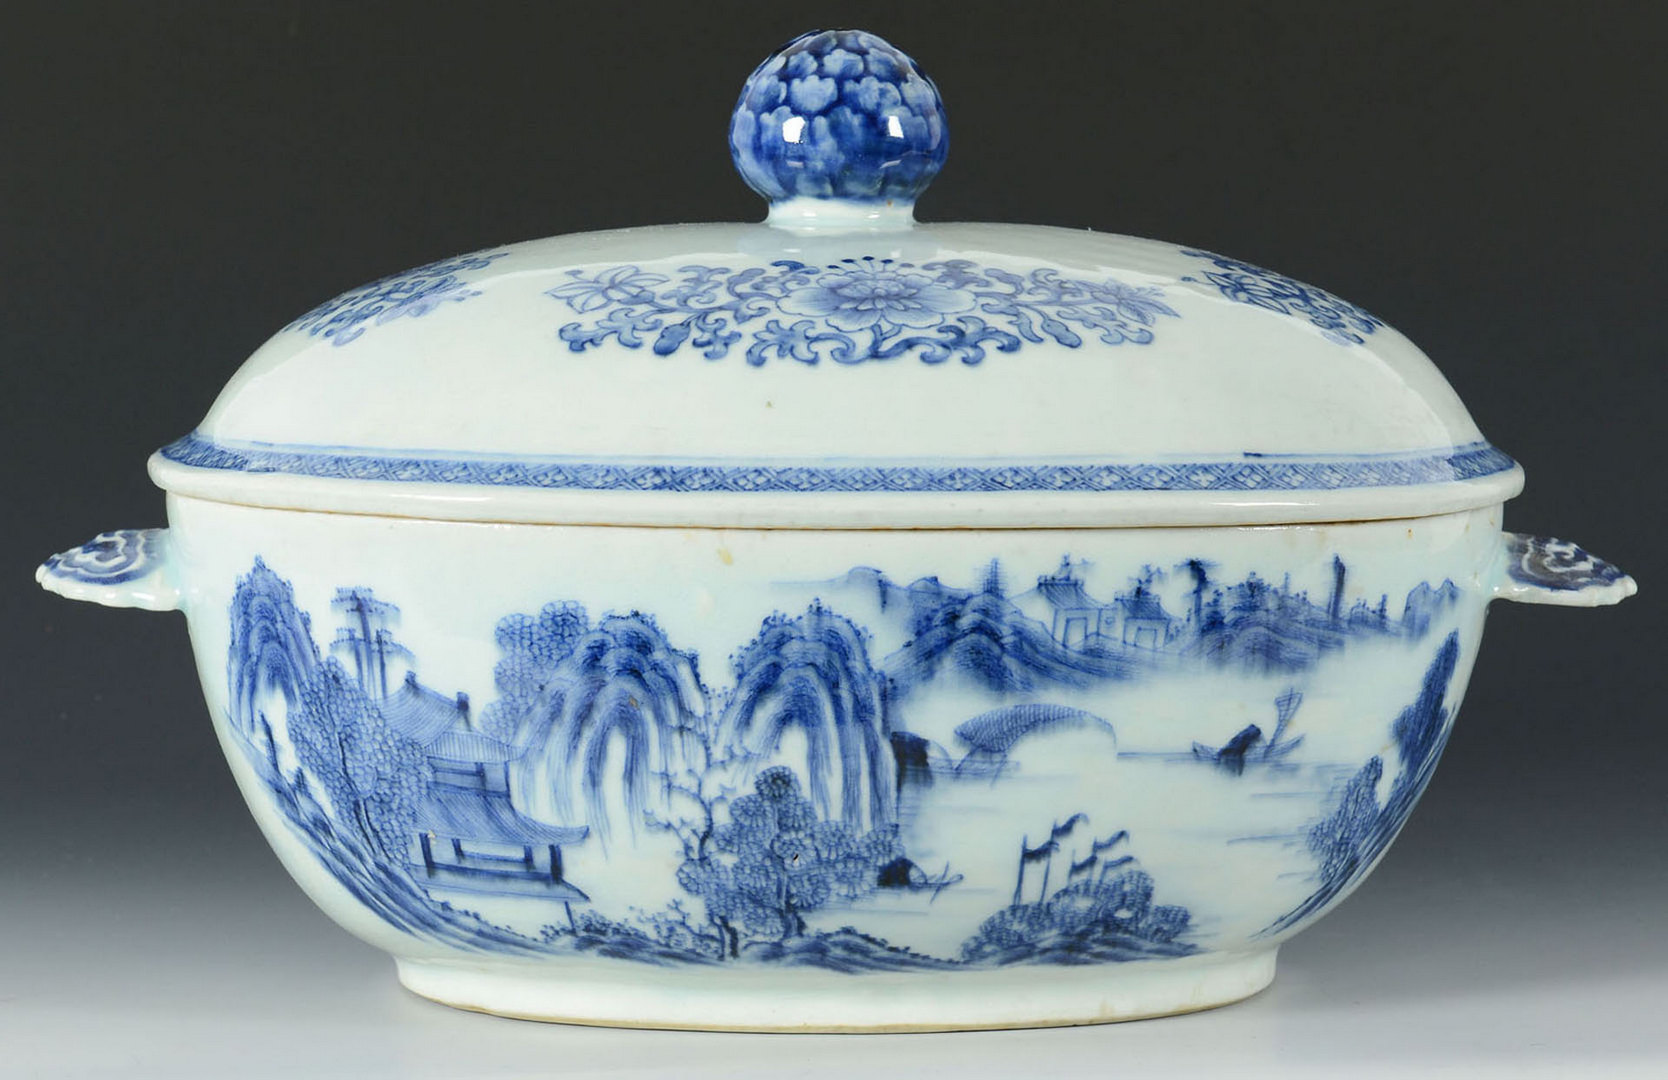 Lot 16: Blue and white Chinese Export oval covered tureen